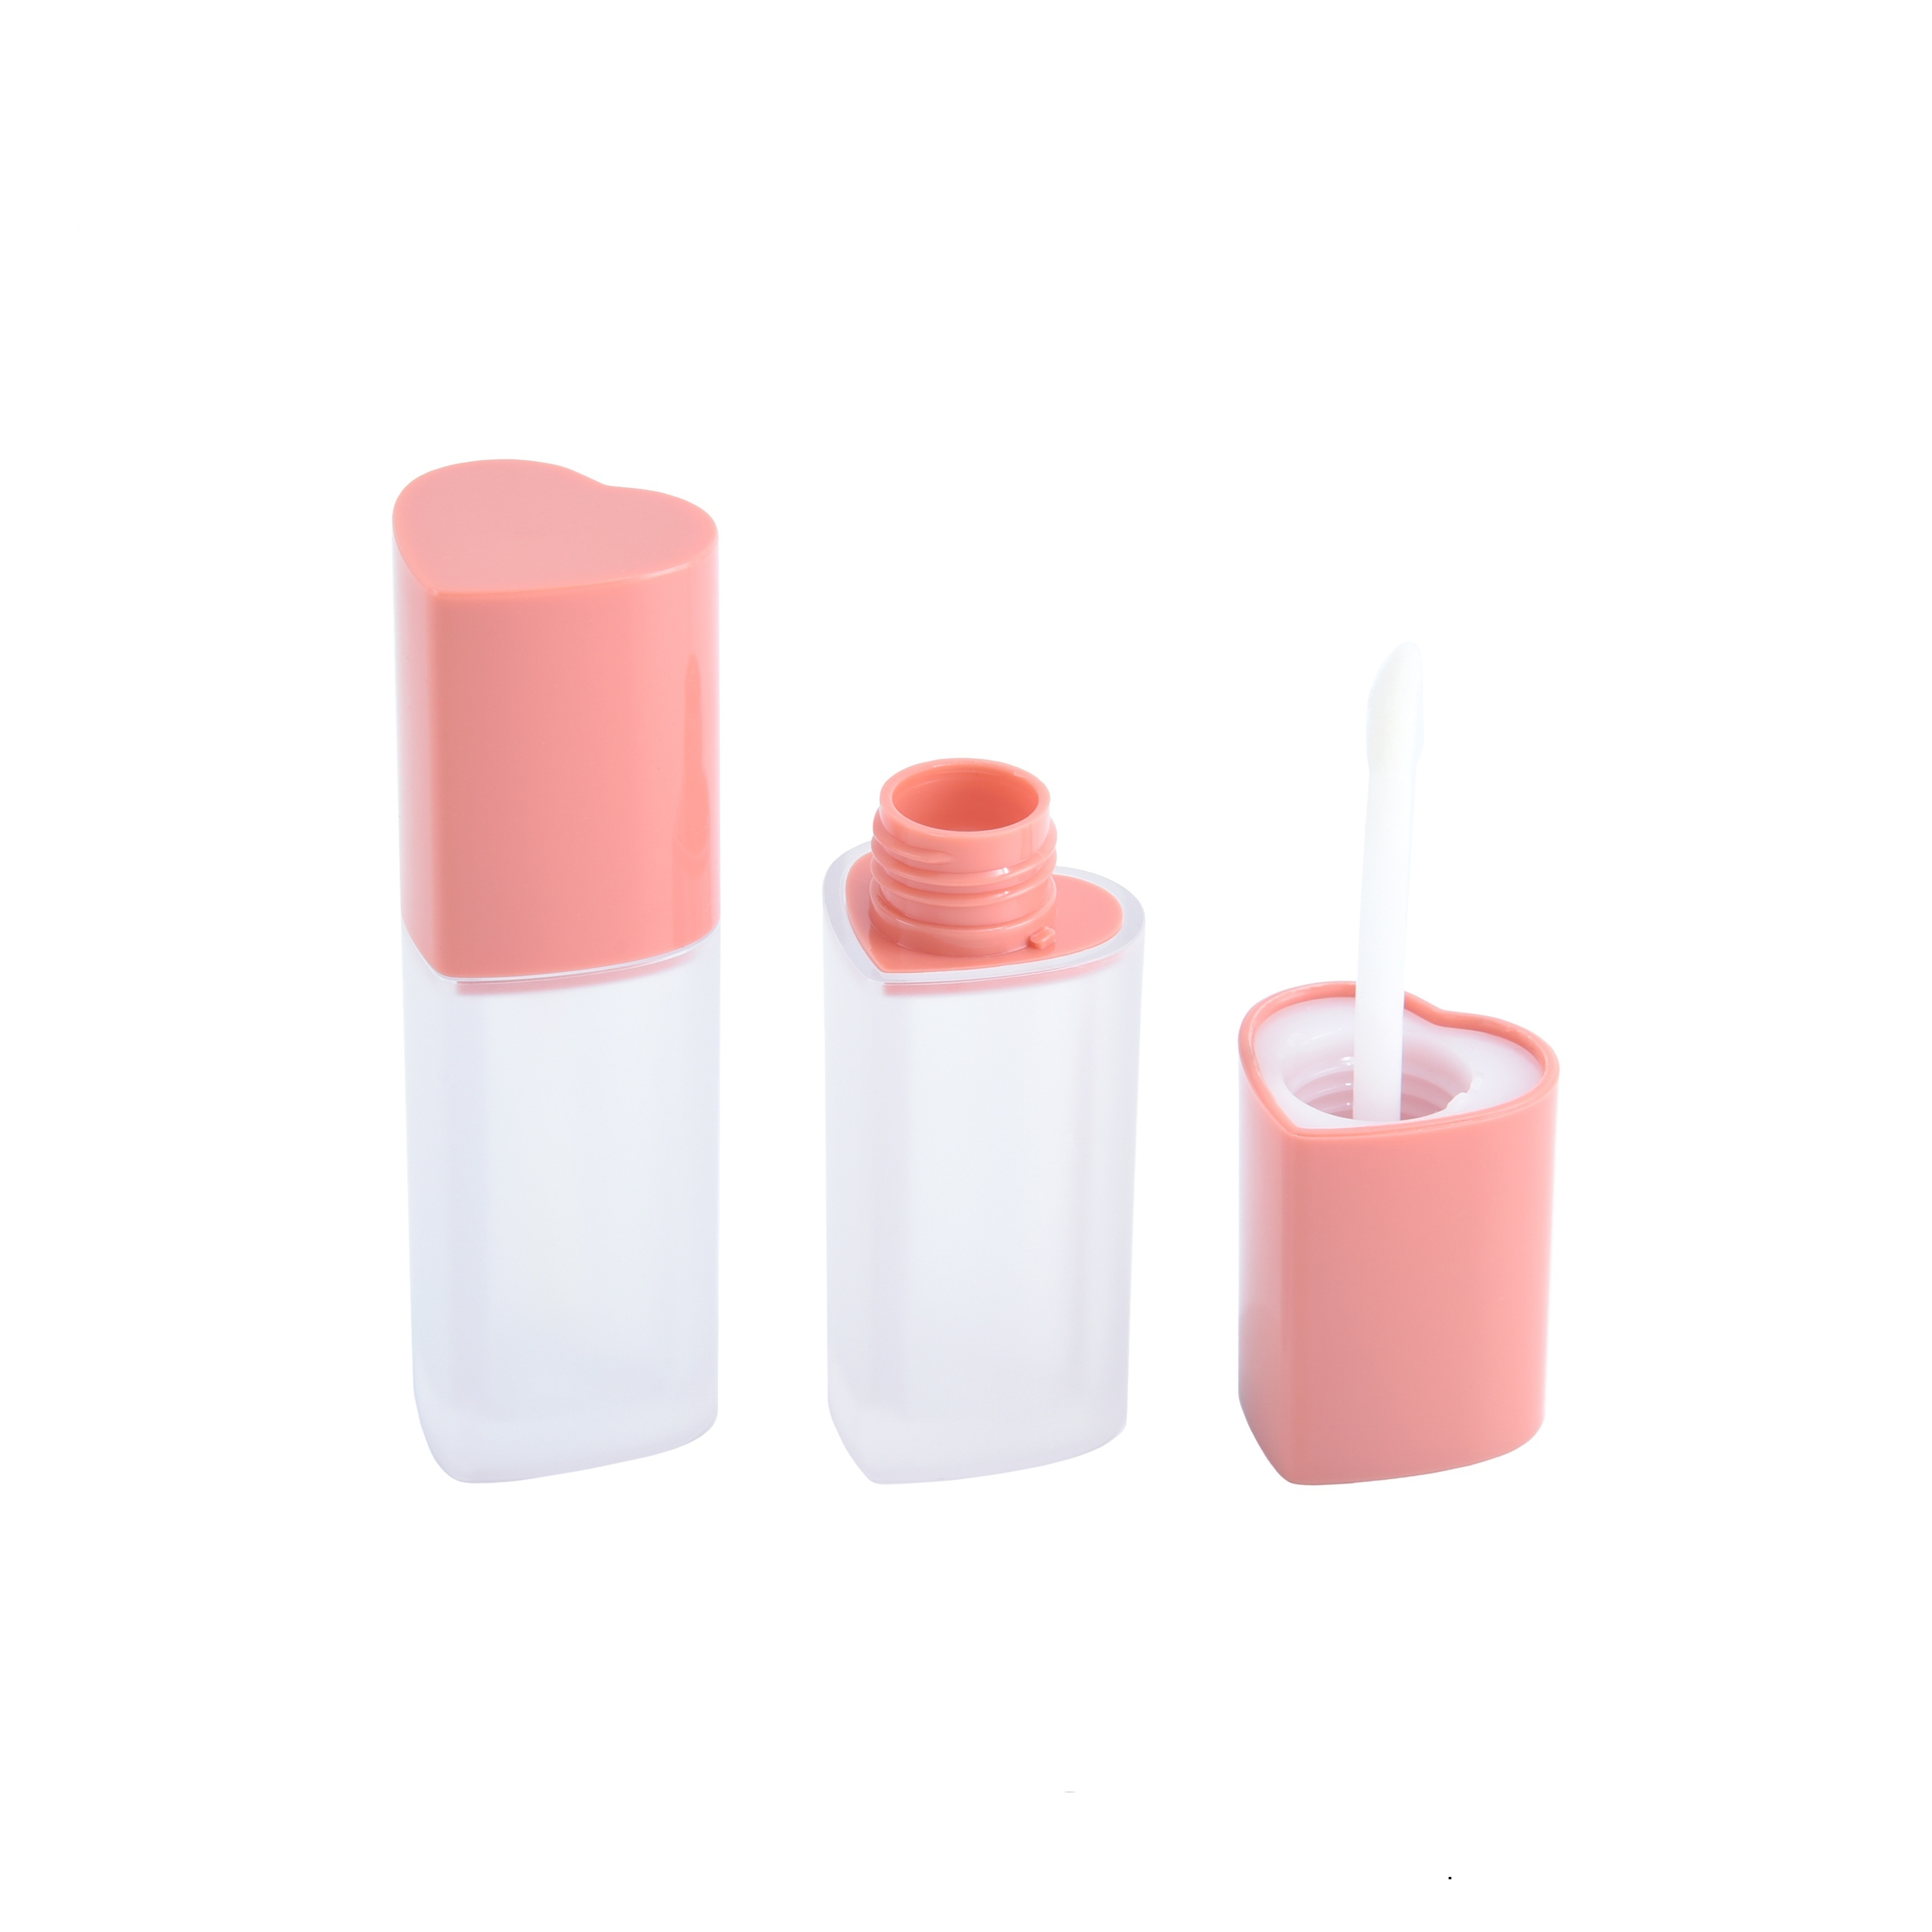 Häerz Form 8ml Lipgloss Tube Luxus eidel Flasche Form Lipgloss Tube